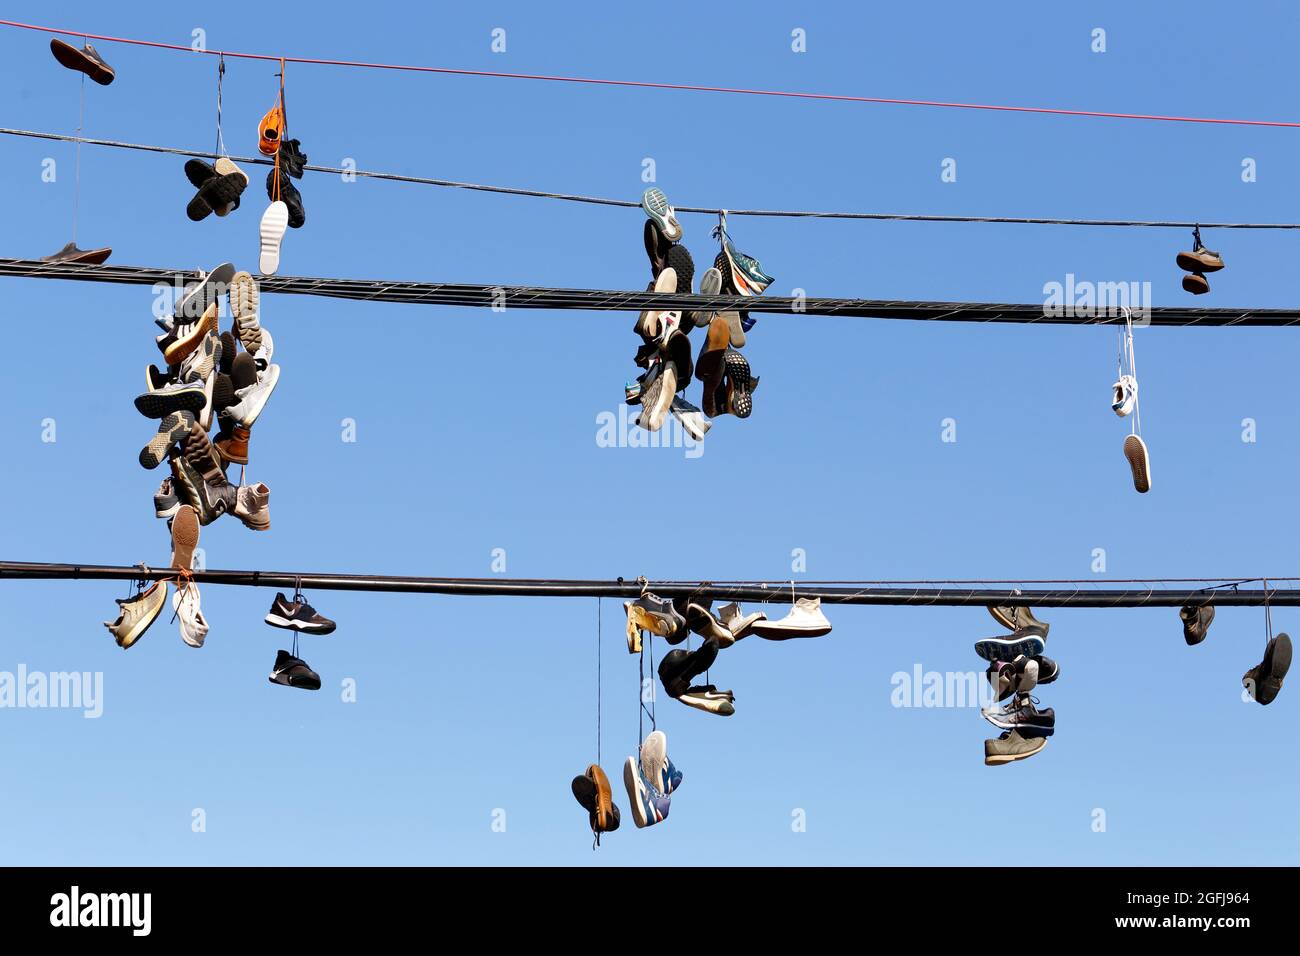 shoefiti, sneakers hanging on telephone wire against a sunny blue sky; sneakers tied together and tossed over a power line. Stock Photo